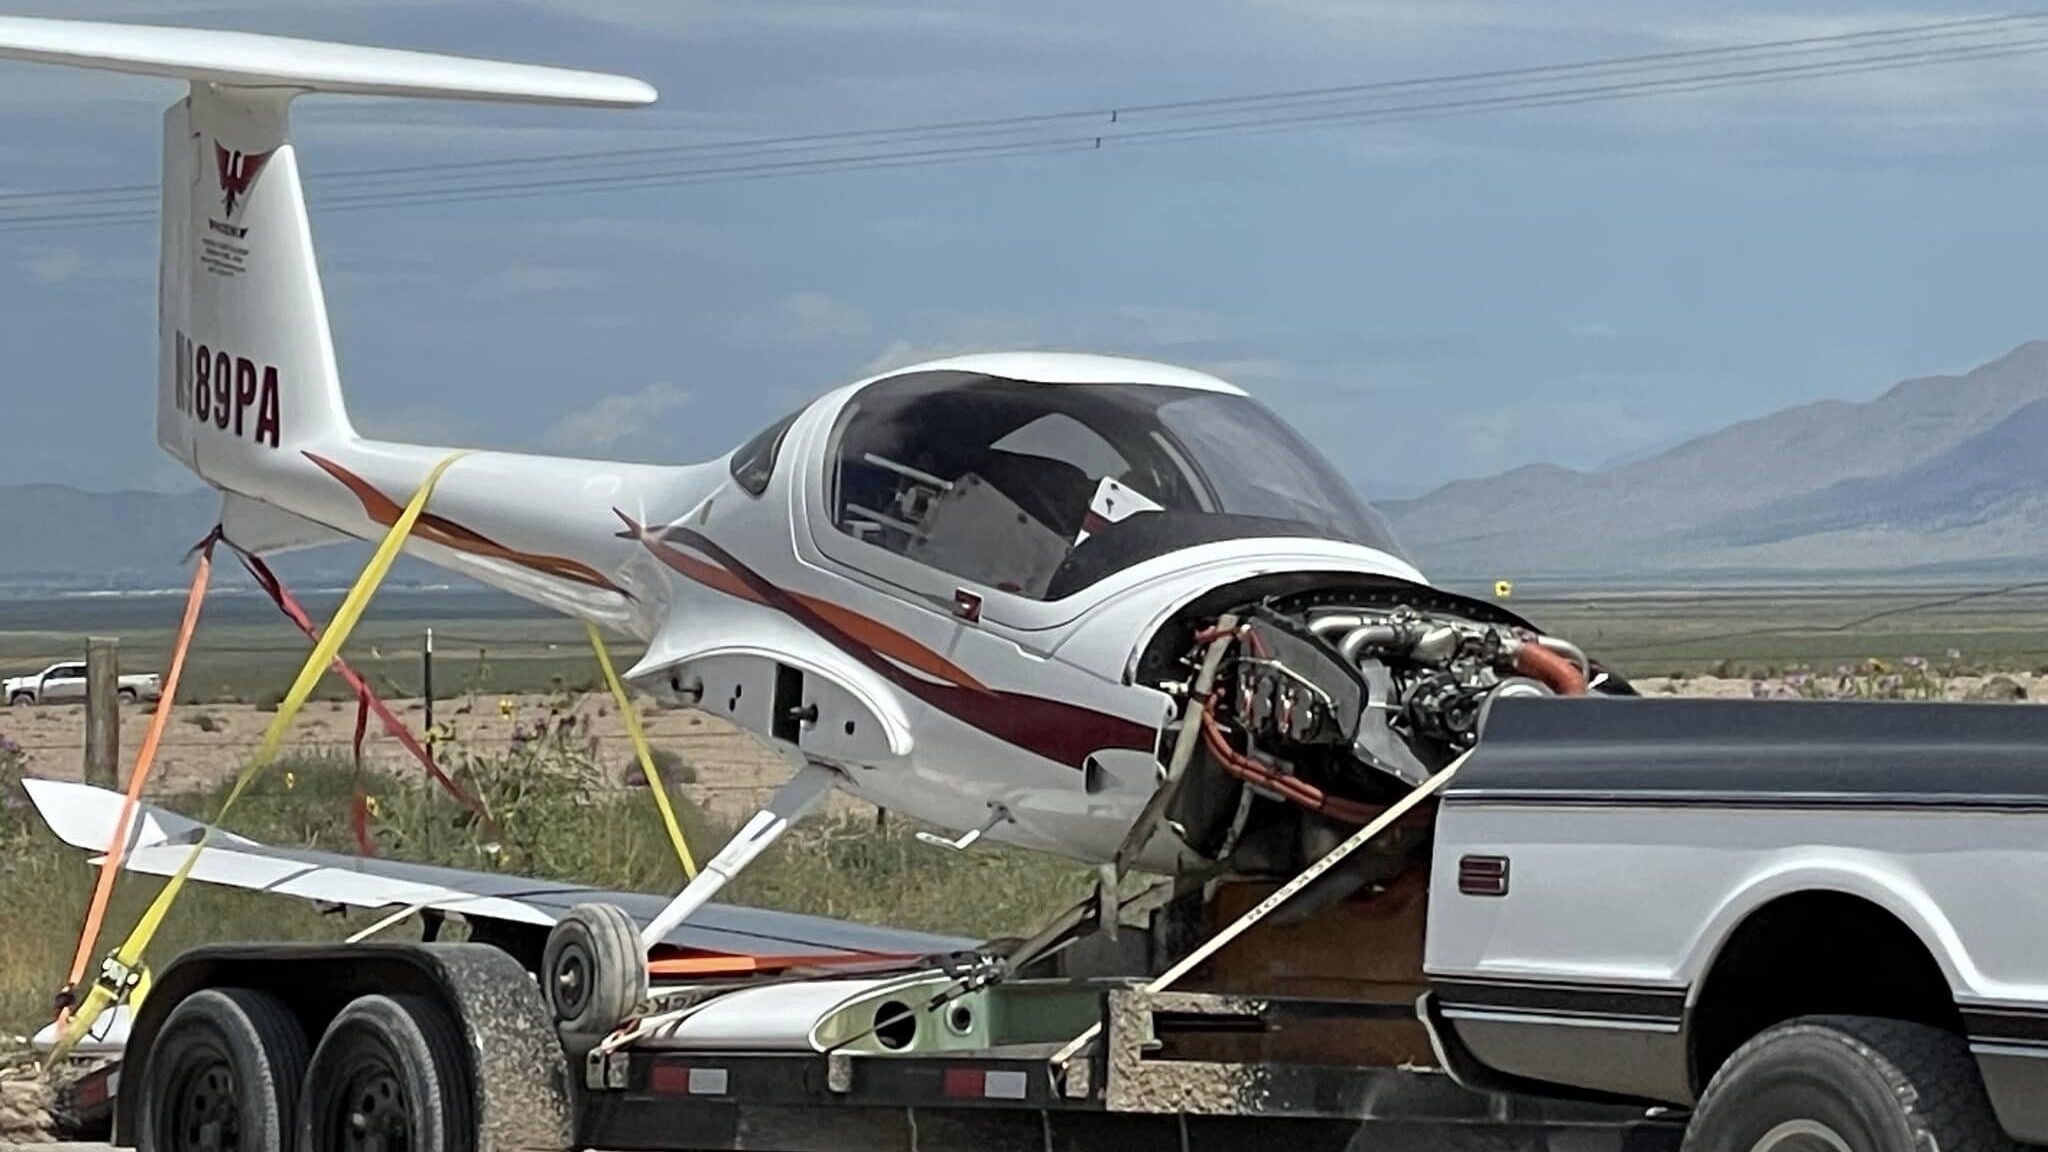 Image of the small airplane that crashed in Utah County on Wednesday. Two people were aboard, but t...